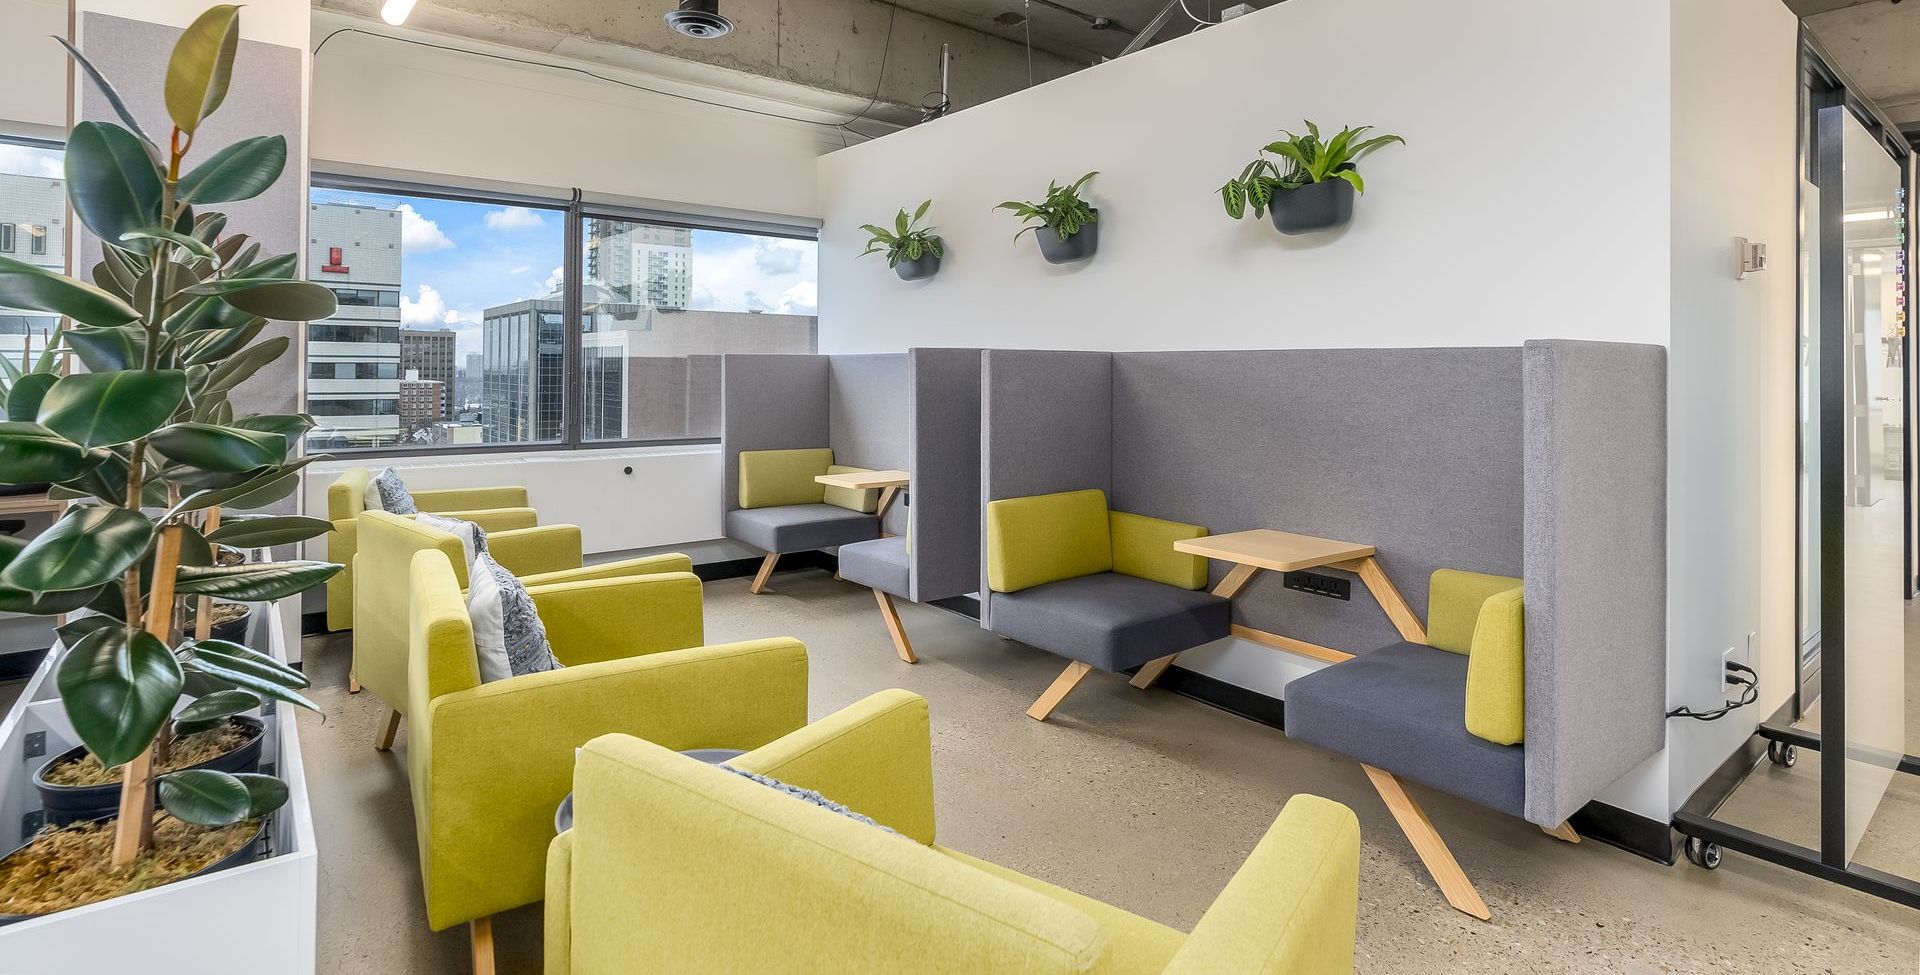 shared work spaces near me | shared office space in Edmonton Alberta Canada - The Workup